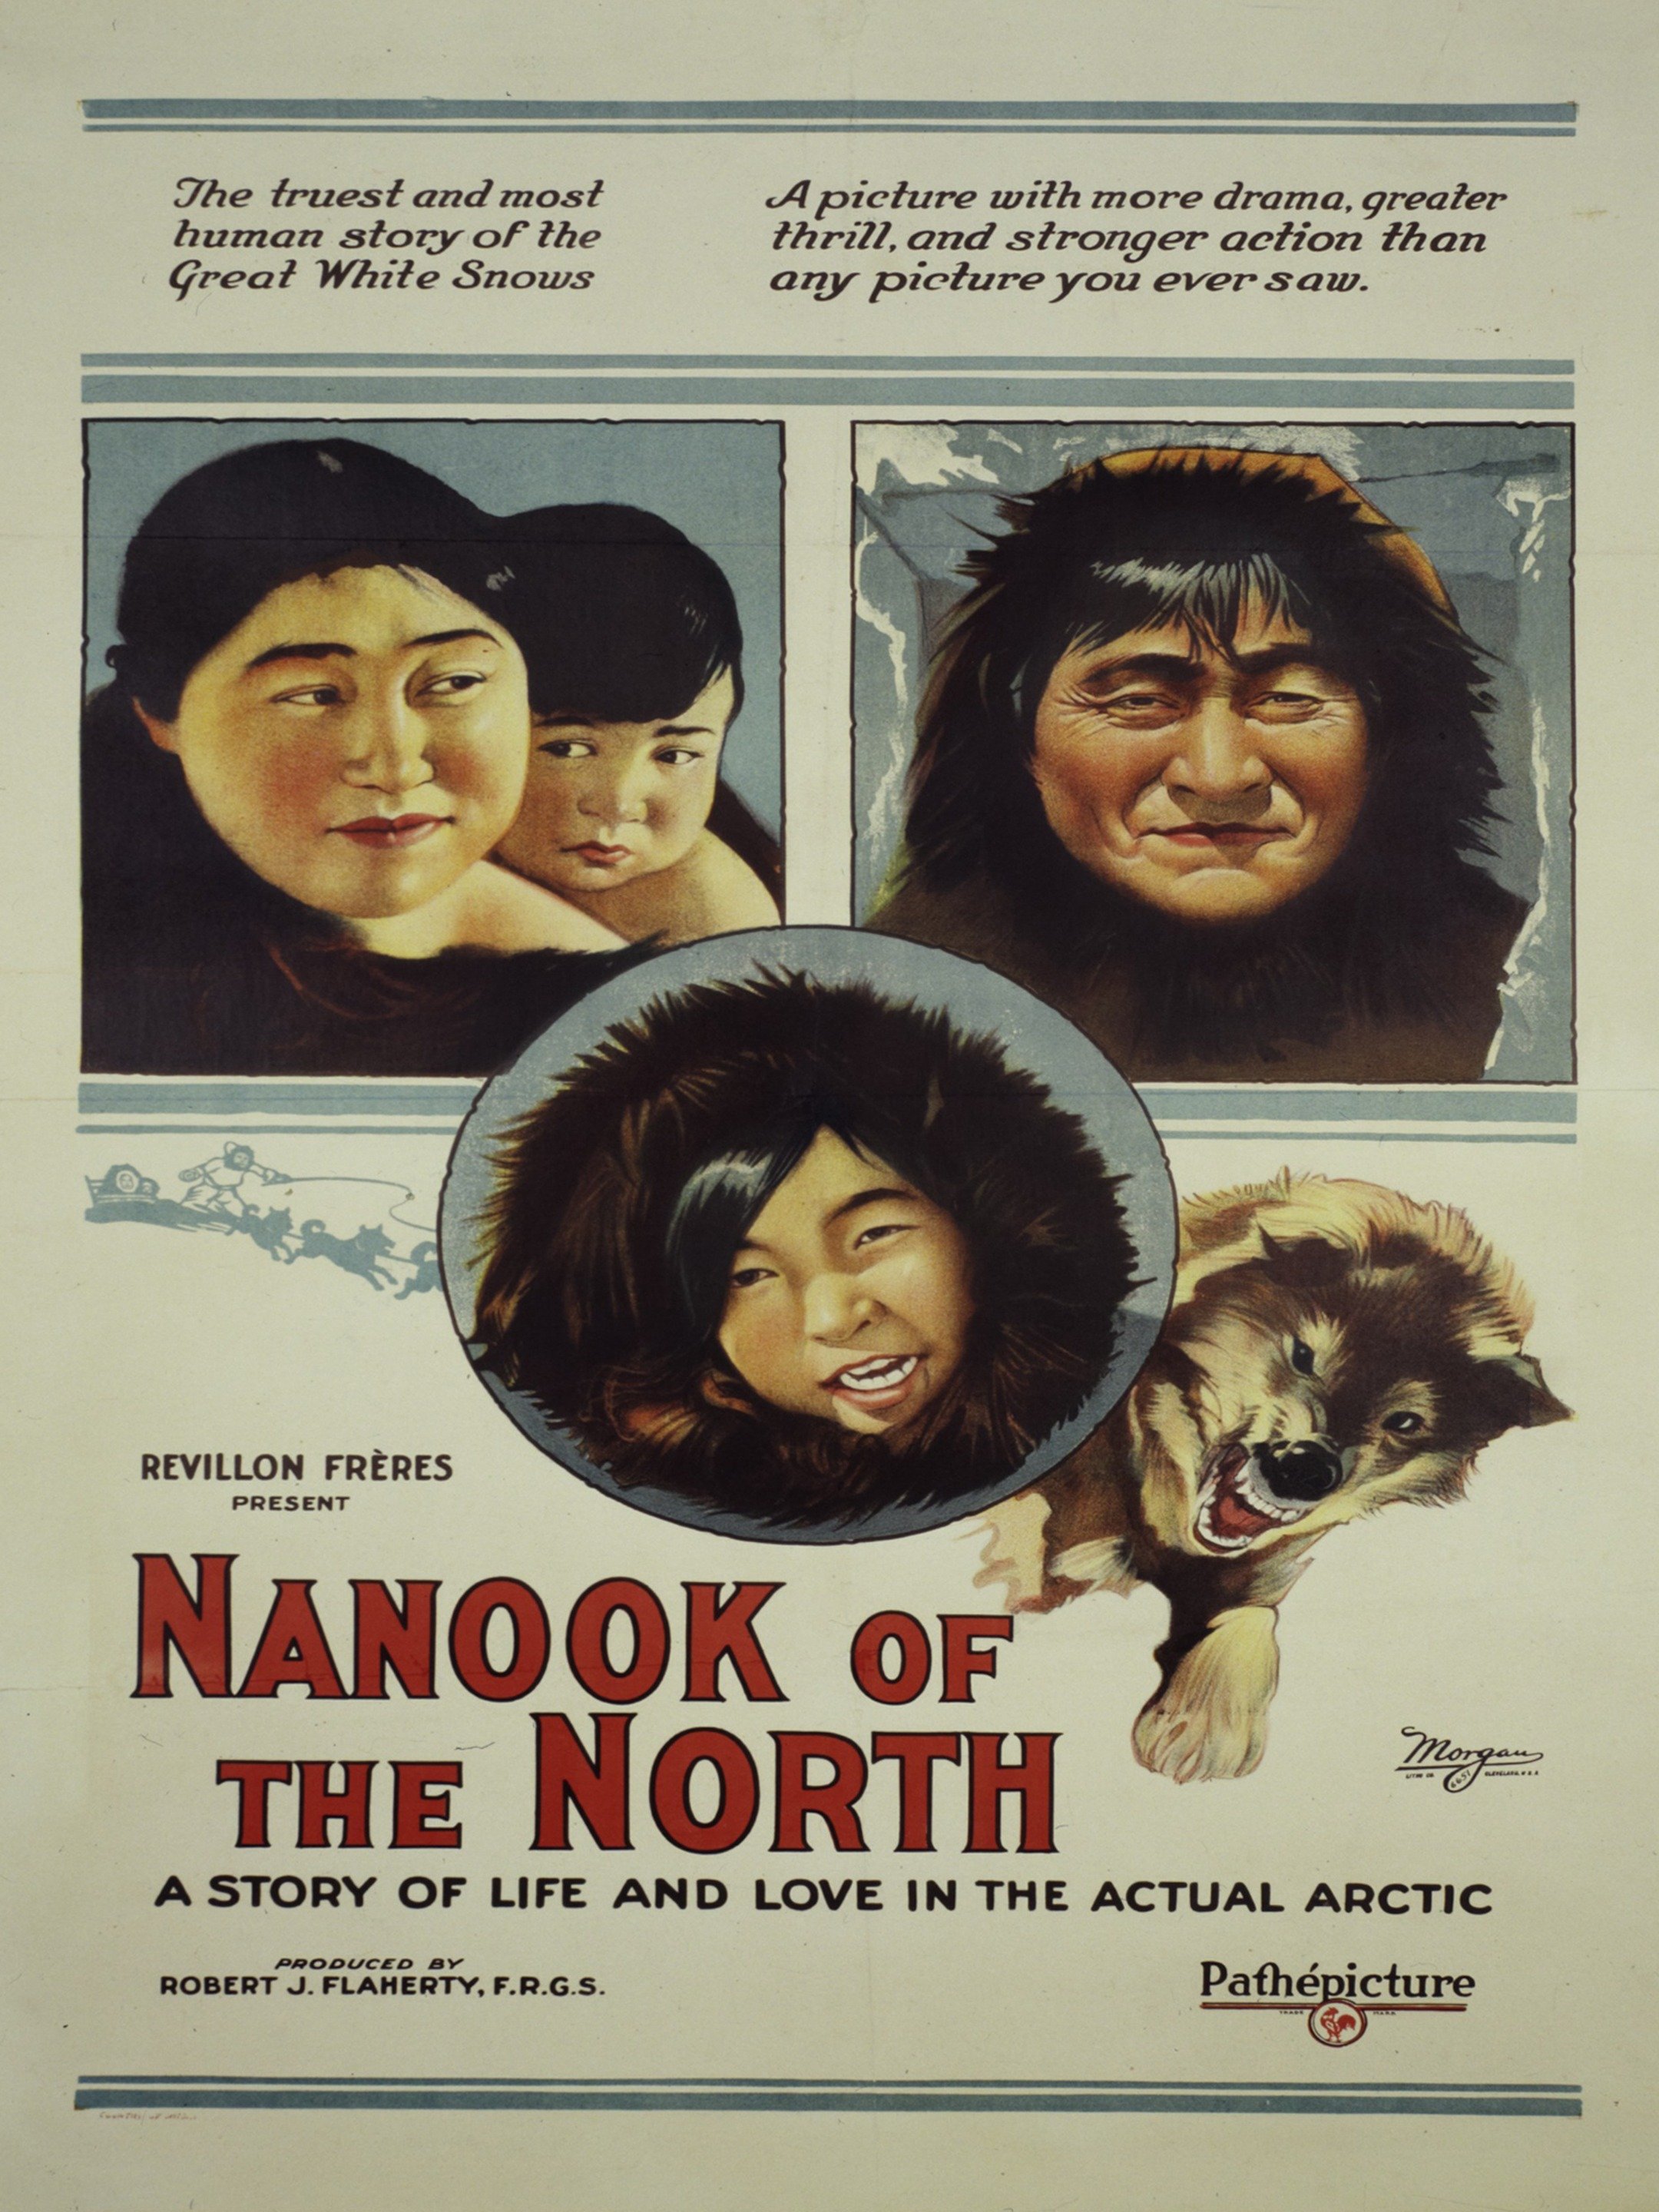 Nanook of the North pic image